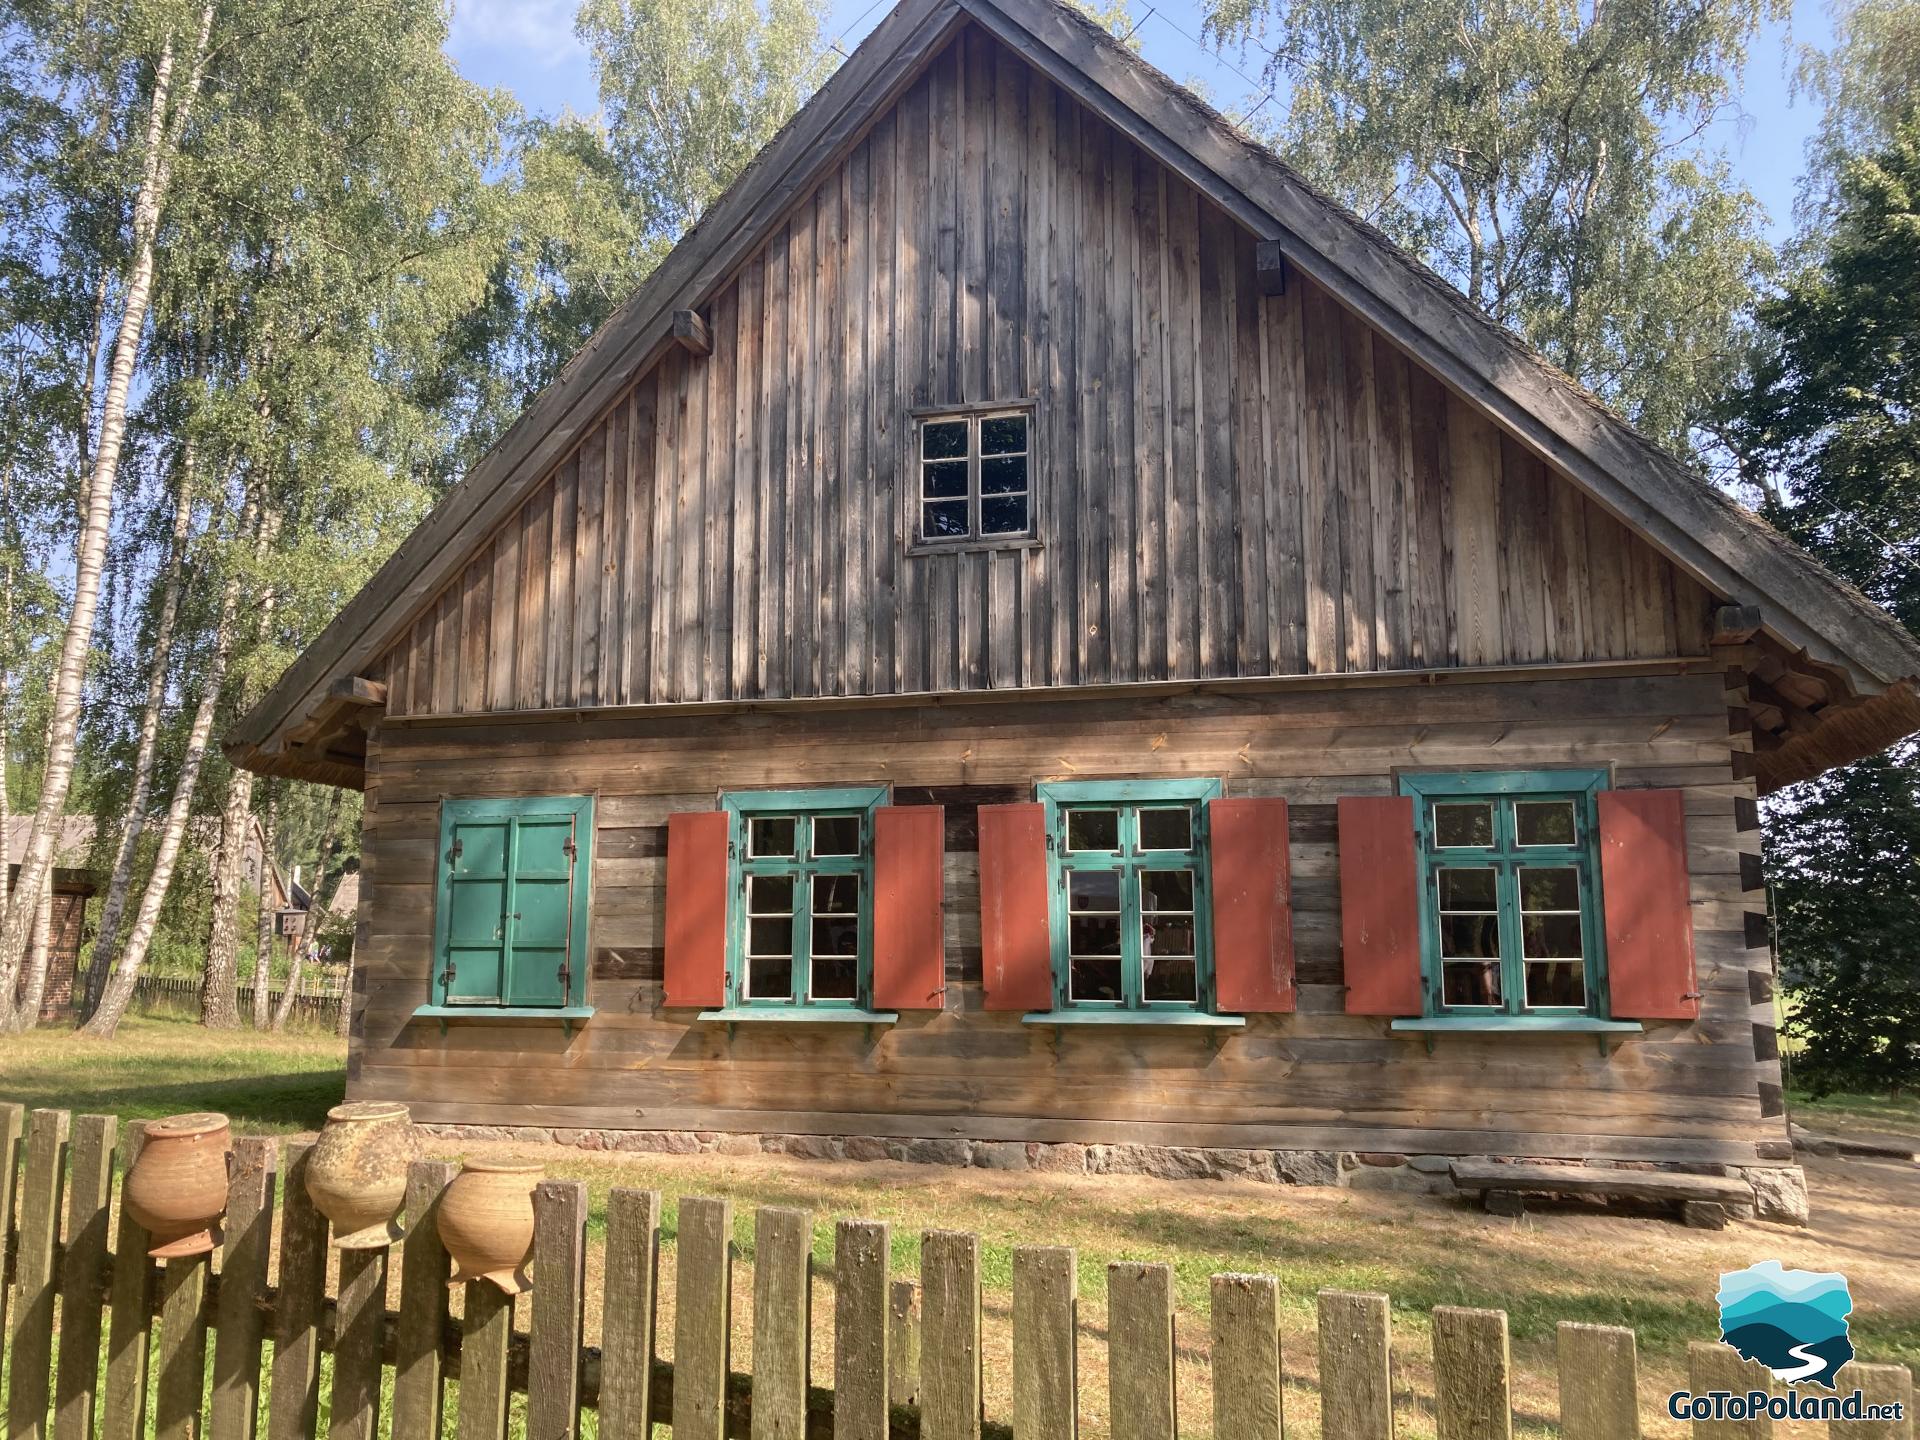 a peasant hut with colourful window frames